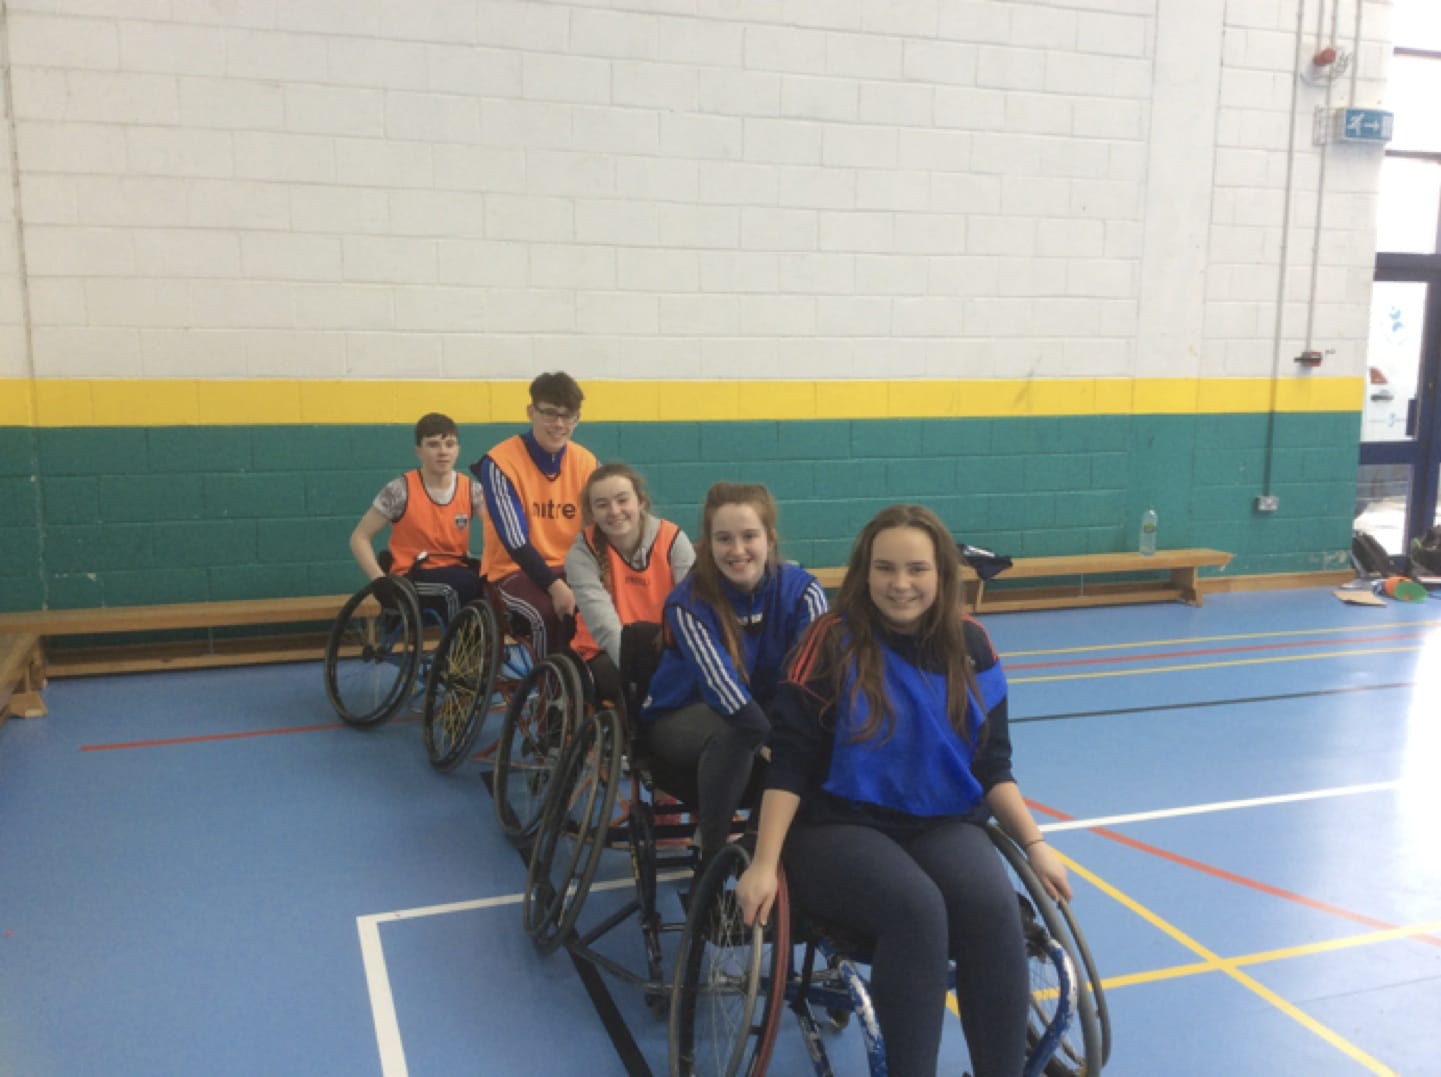 March 2017: TY students in Desmond College taking part in Wheelchair Basketball